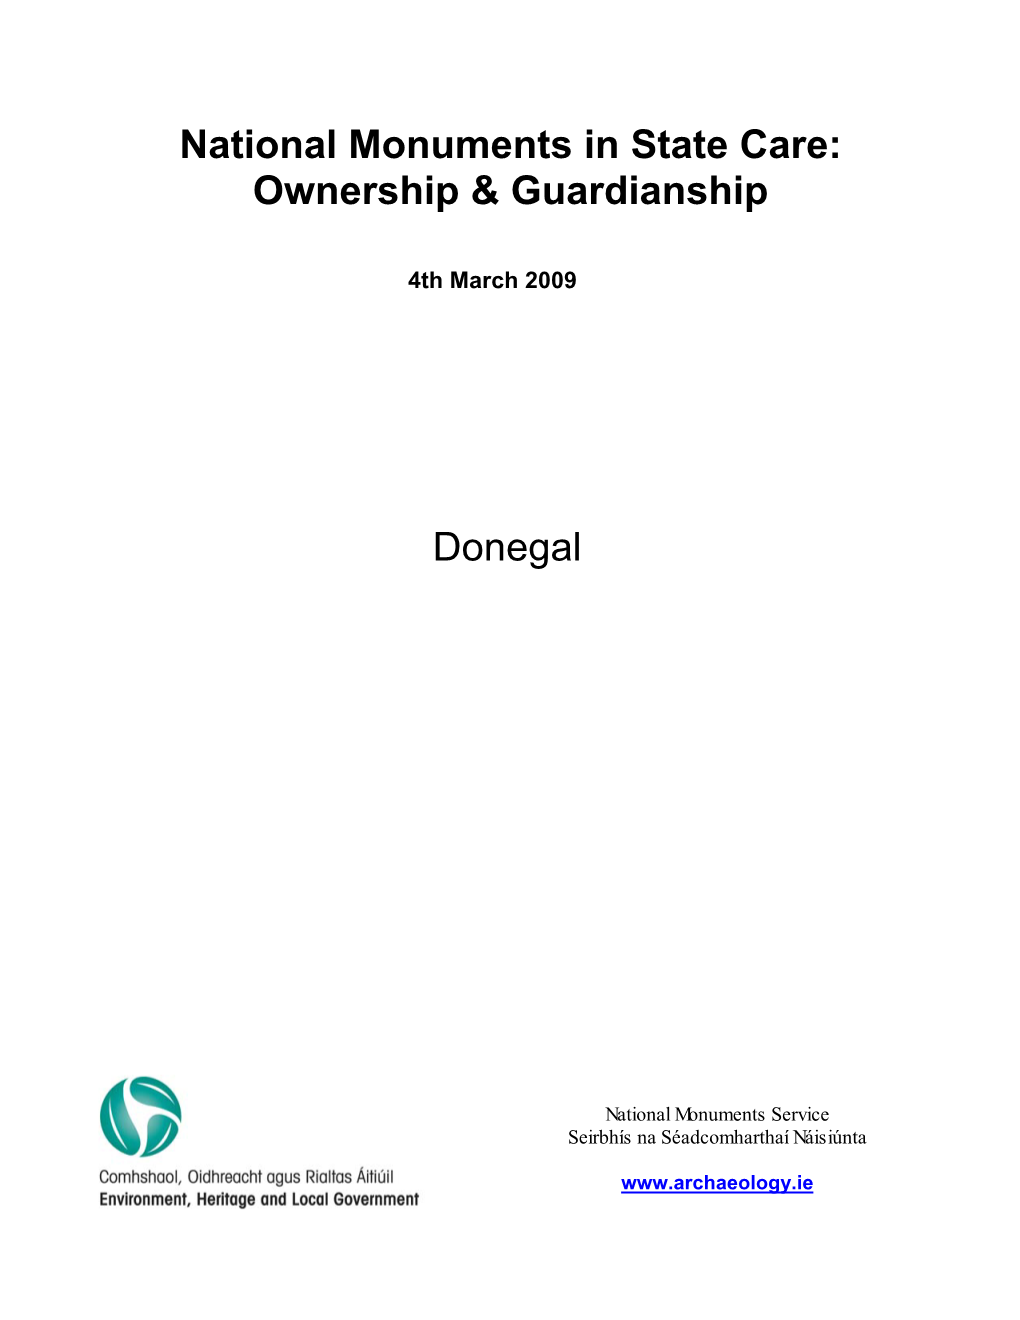 National Monuments in State Care: Ownership & Guardianship